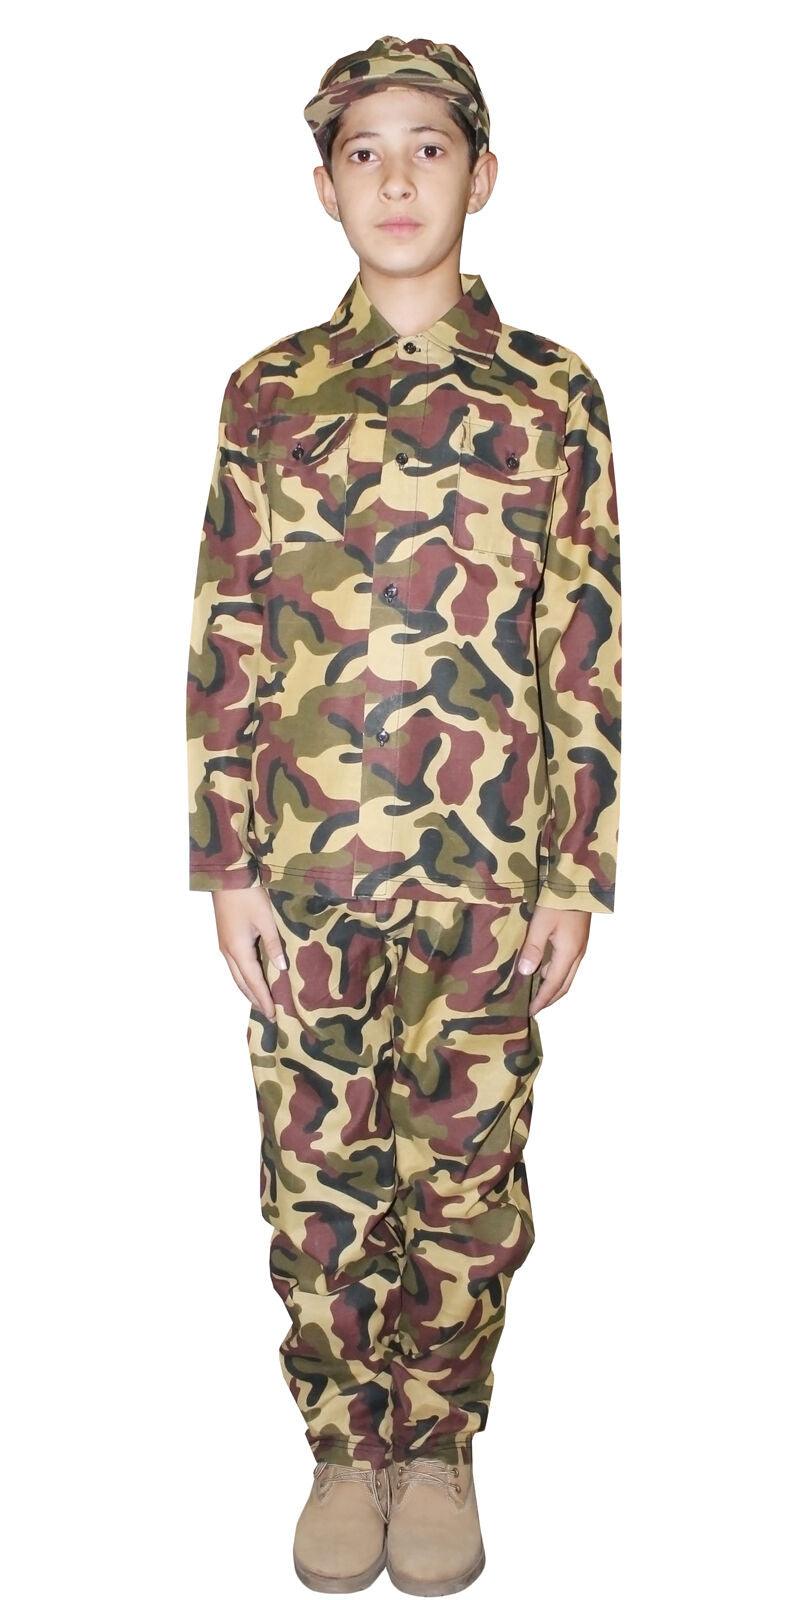 New Kids Boys Camouflage Costume Armed Forces Fancy Dress Outfit - Labreeze